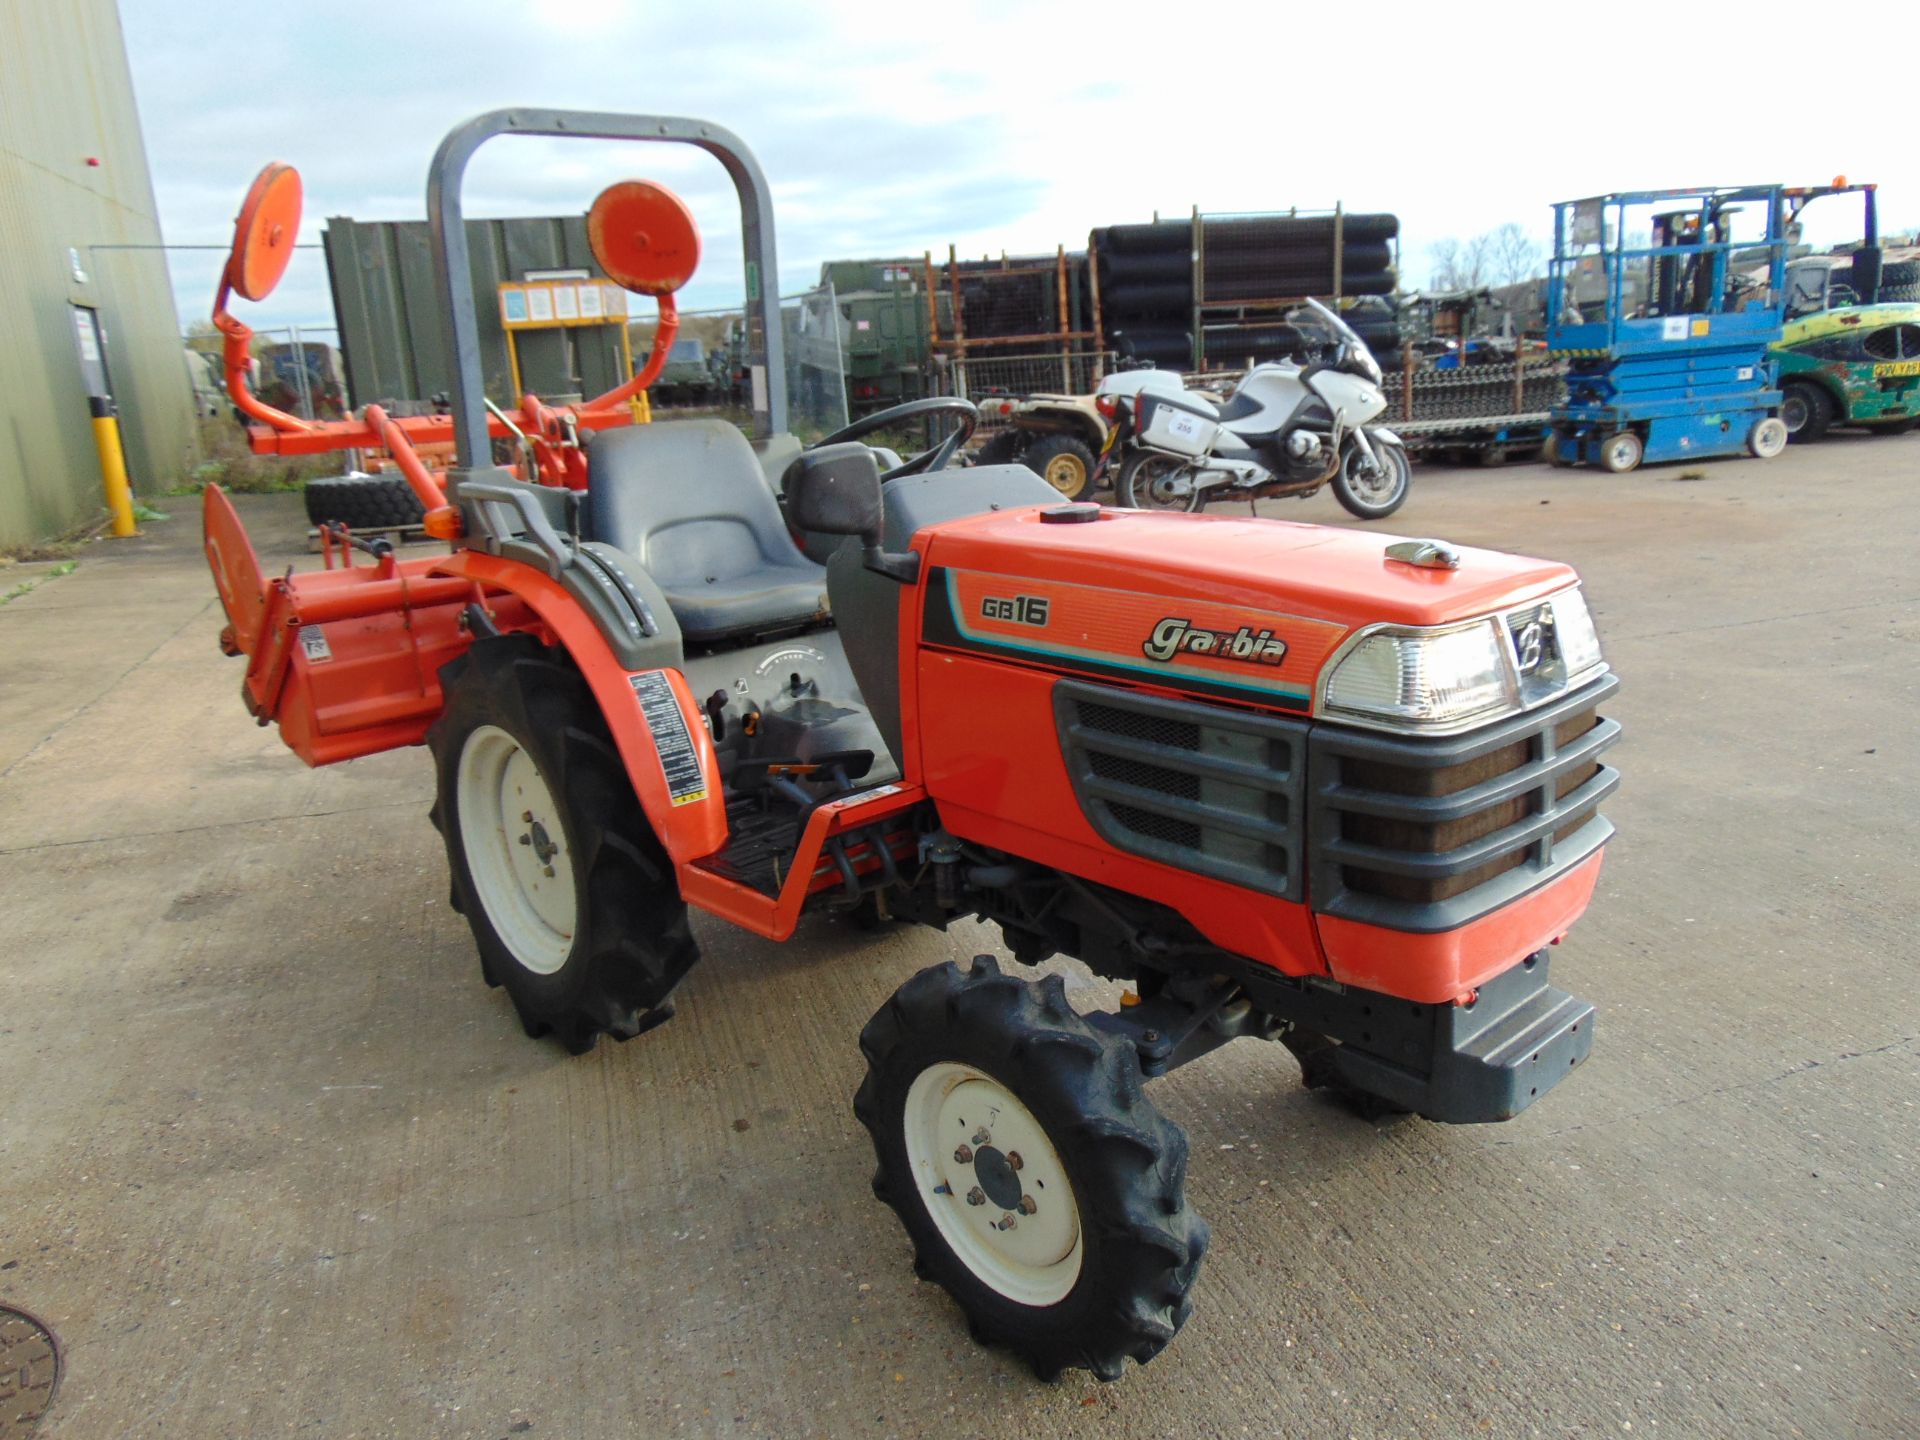 Kubota Granbia GB16 4x4 Diesel Compact Tractor c/w Rotovator ONLY 467 HOURS! - Image 4 of 24